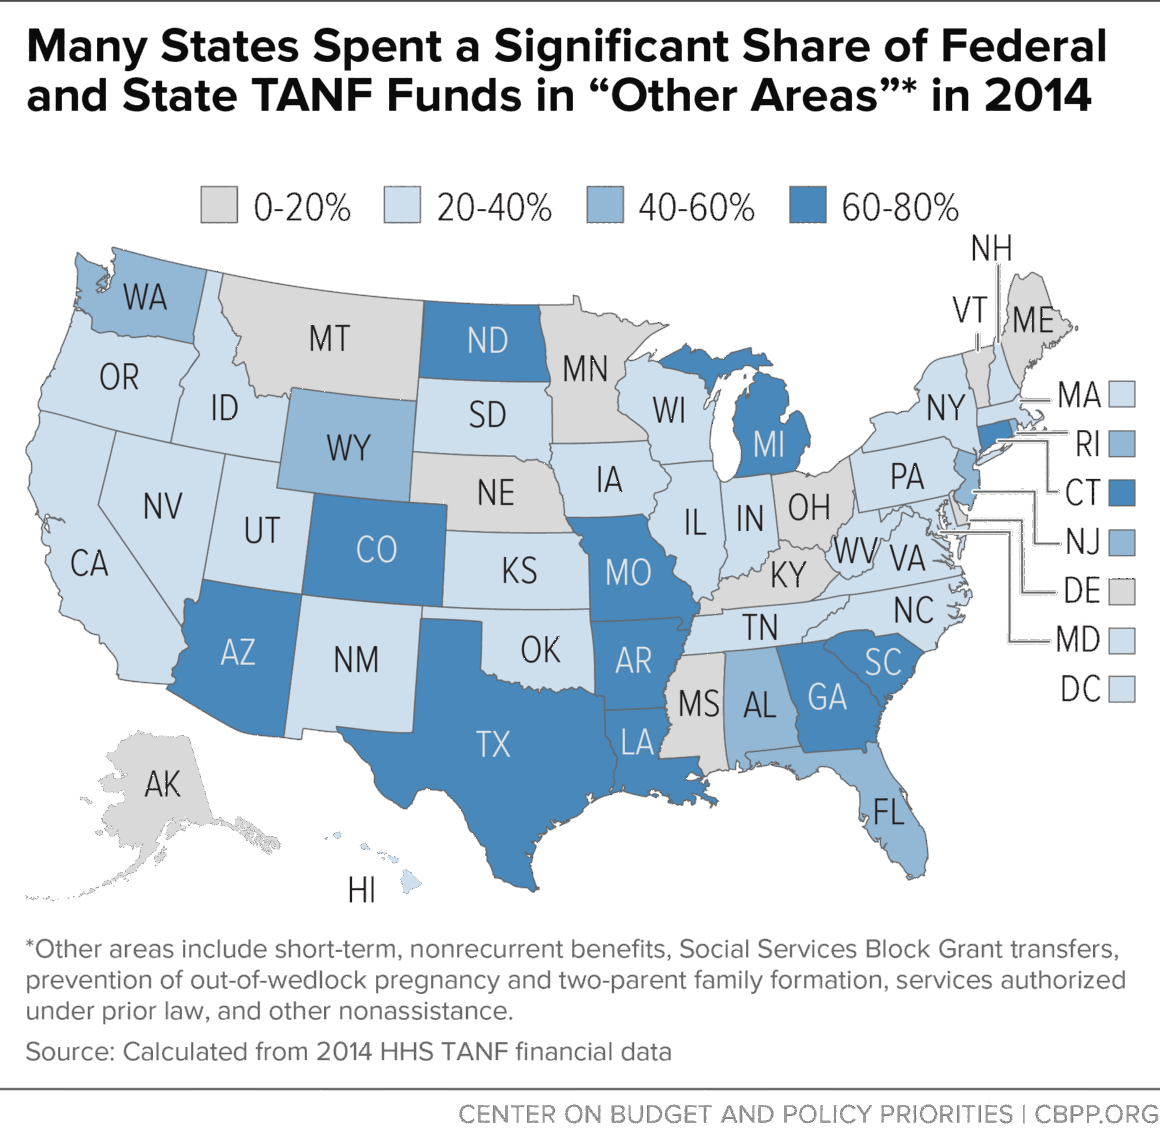 Many States Signficant Share in "Other Areas"